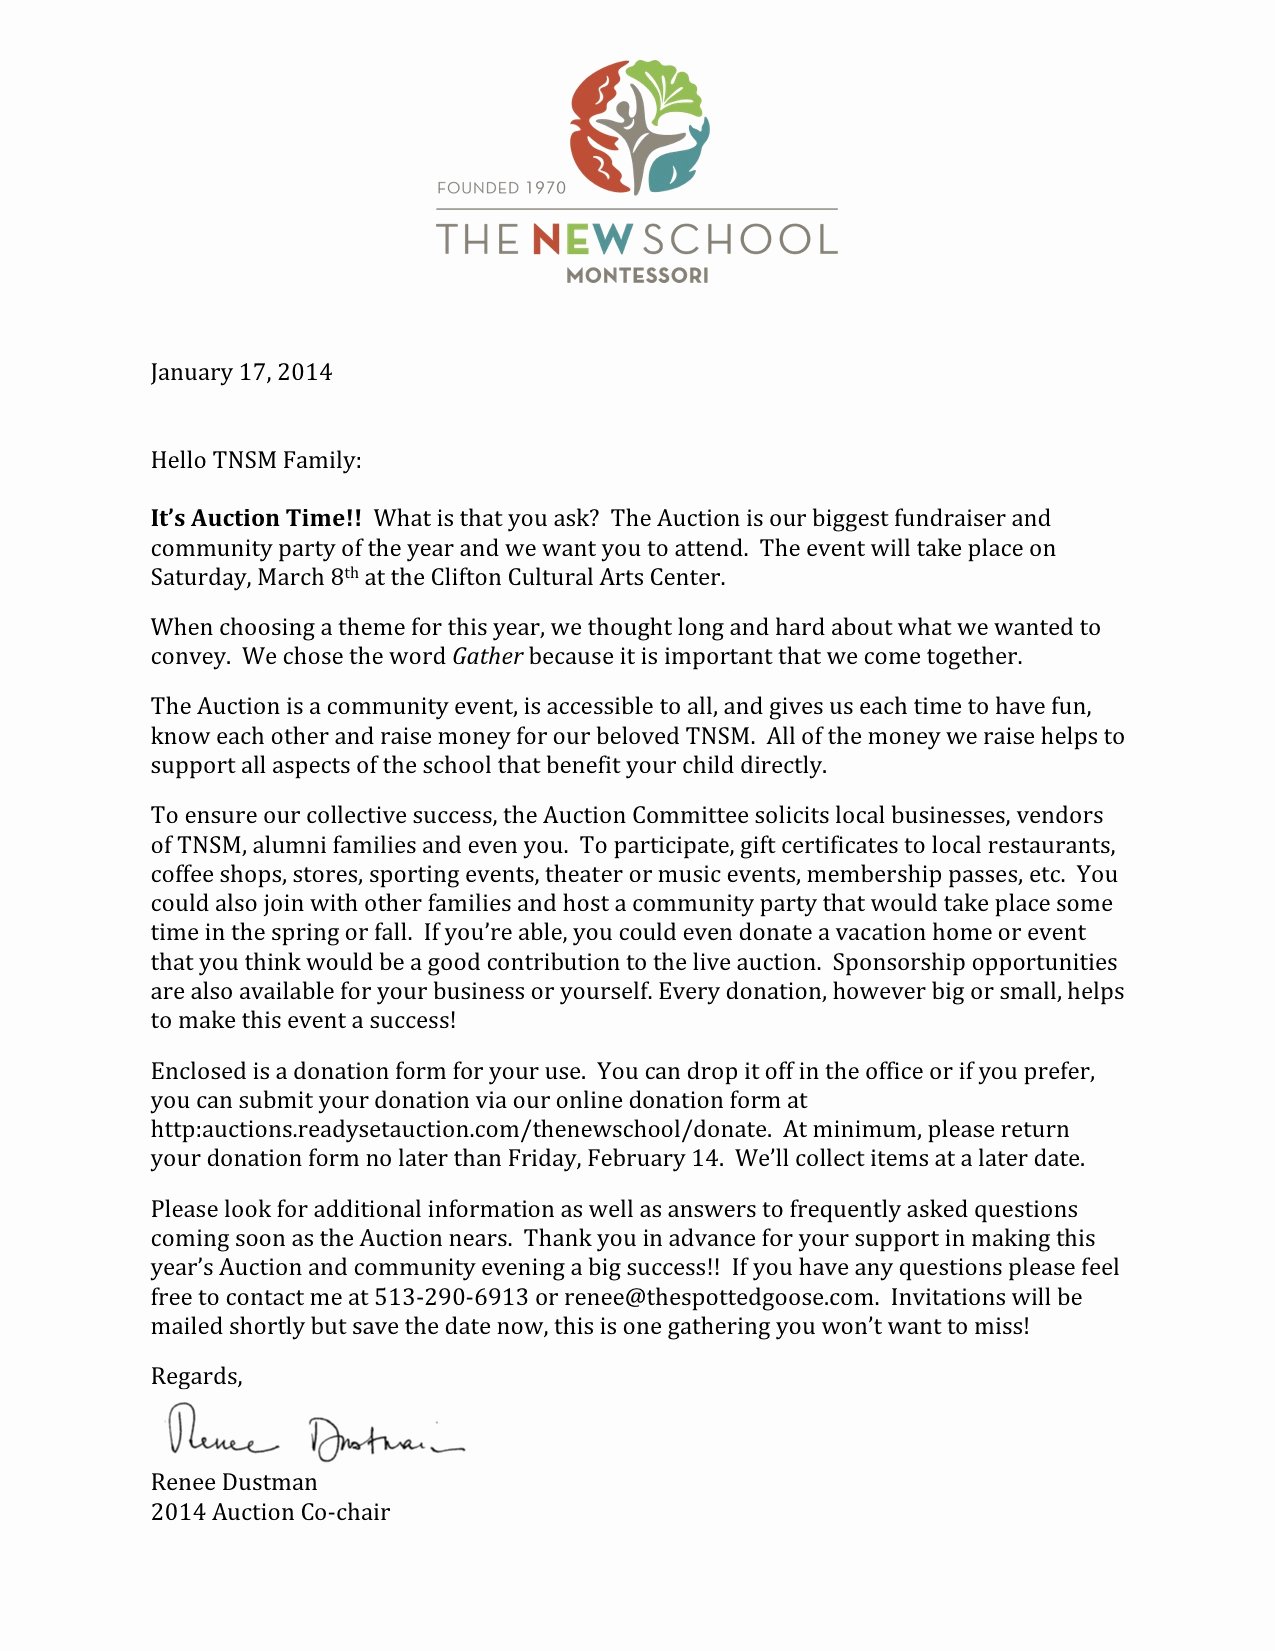 Missions Trip Fundraising Letter Elegant Auction Letter and Donation form the New School Montessori